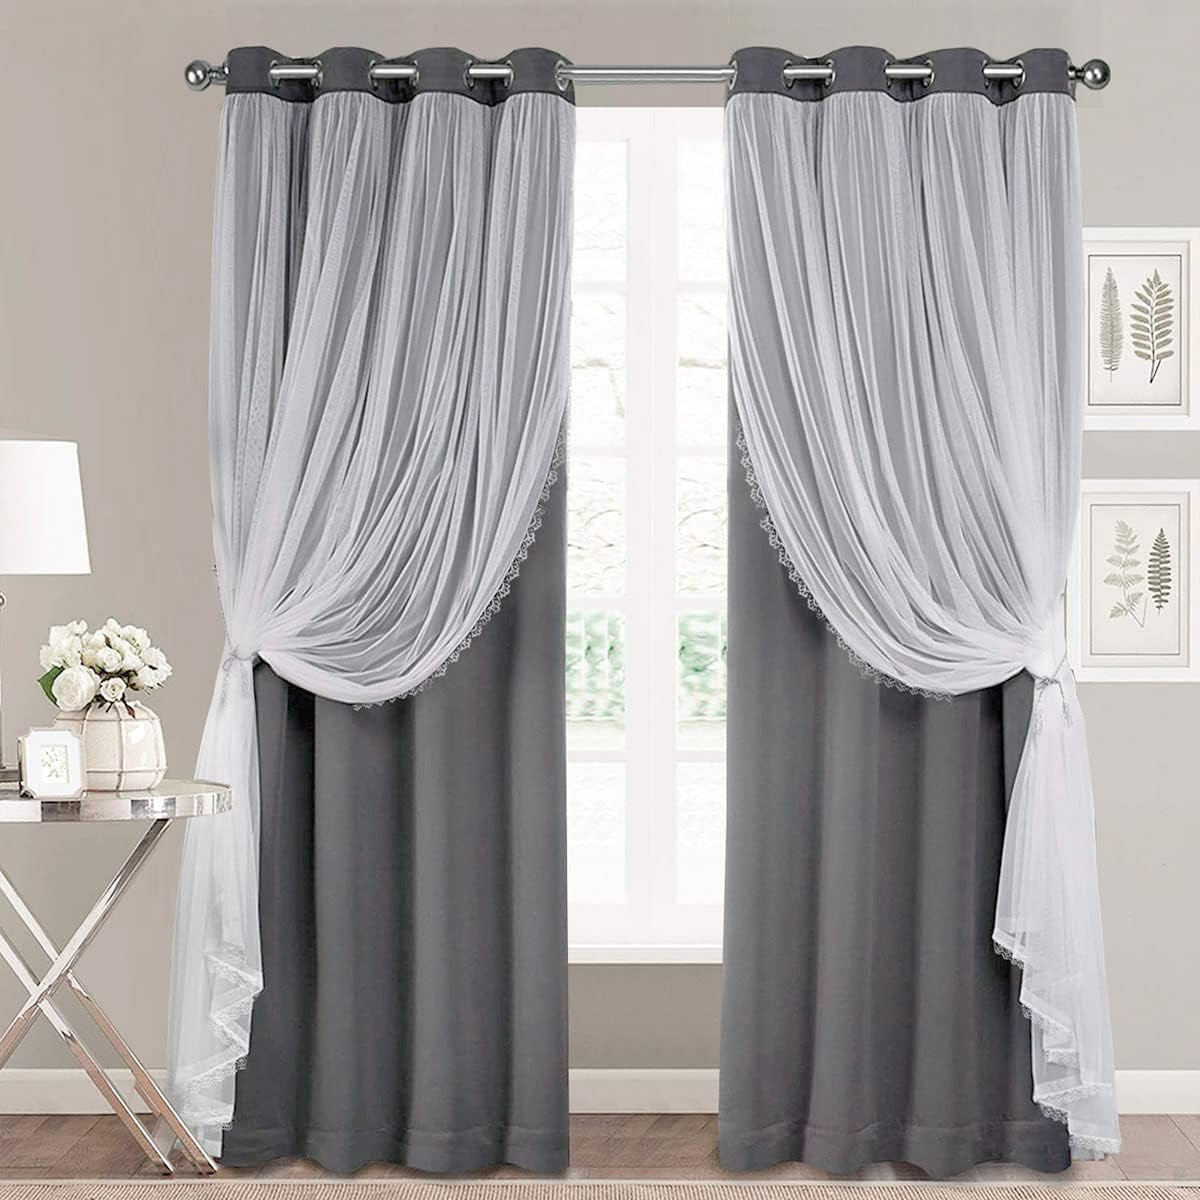 Pink Blackout Curtains 84 Inch Length - Double Layers Princess Girls Curtains & Draperies Panels for Kids Bedroom Living Room Nursery Pink Lace Hem Room Darkening Curtains, 2 Pcs  SOFJAGETQ Grey 52 X 96 